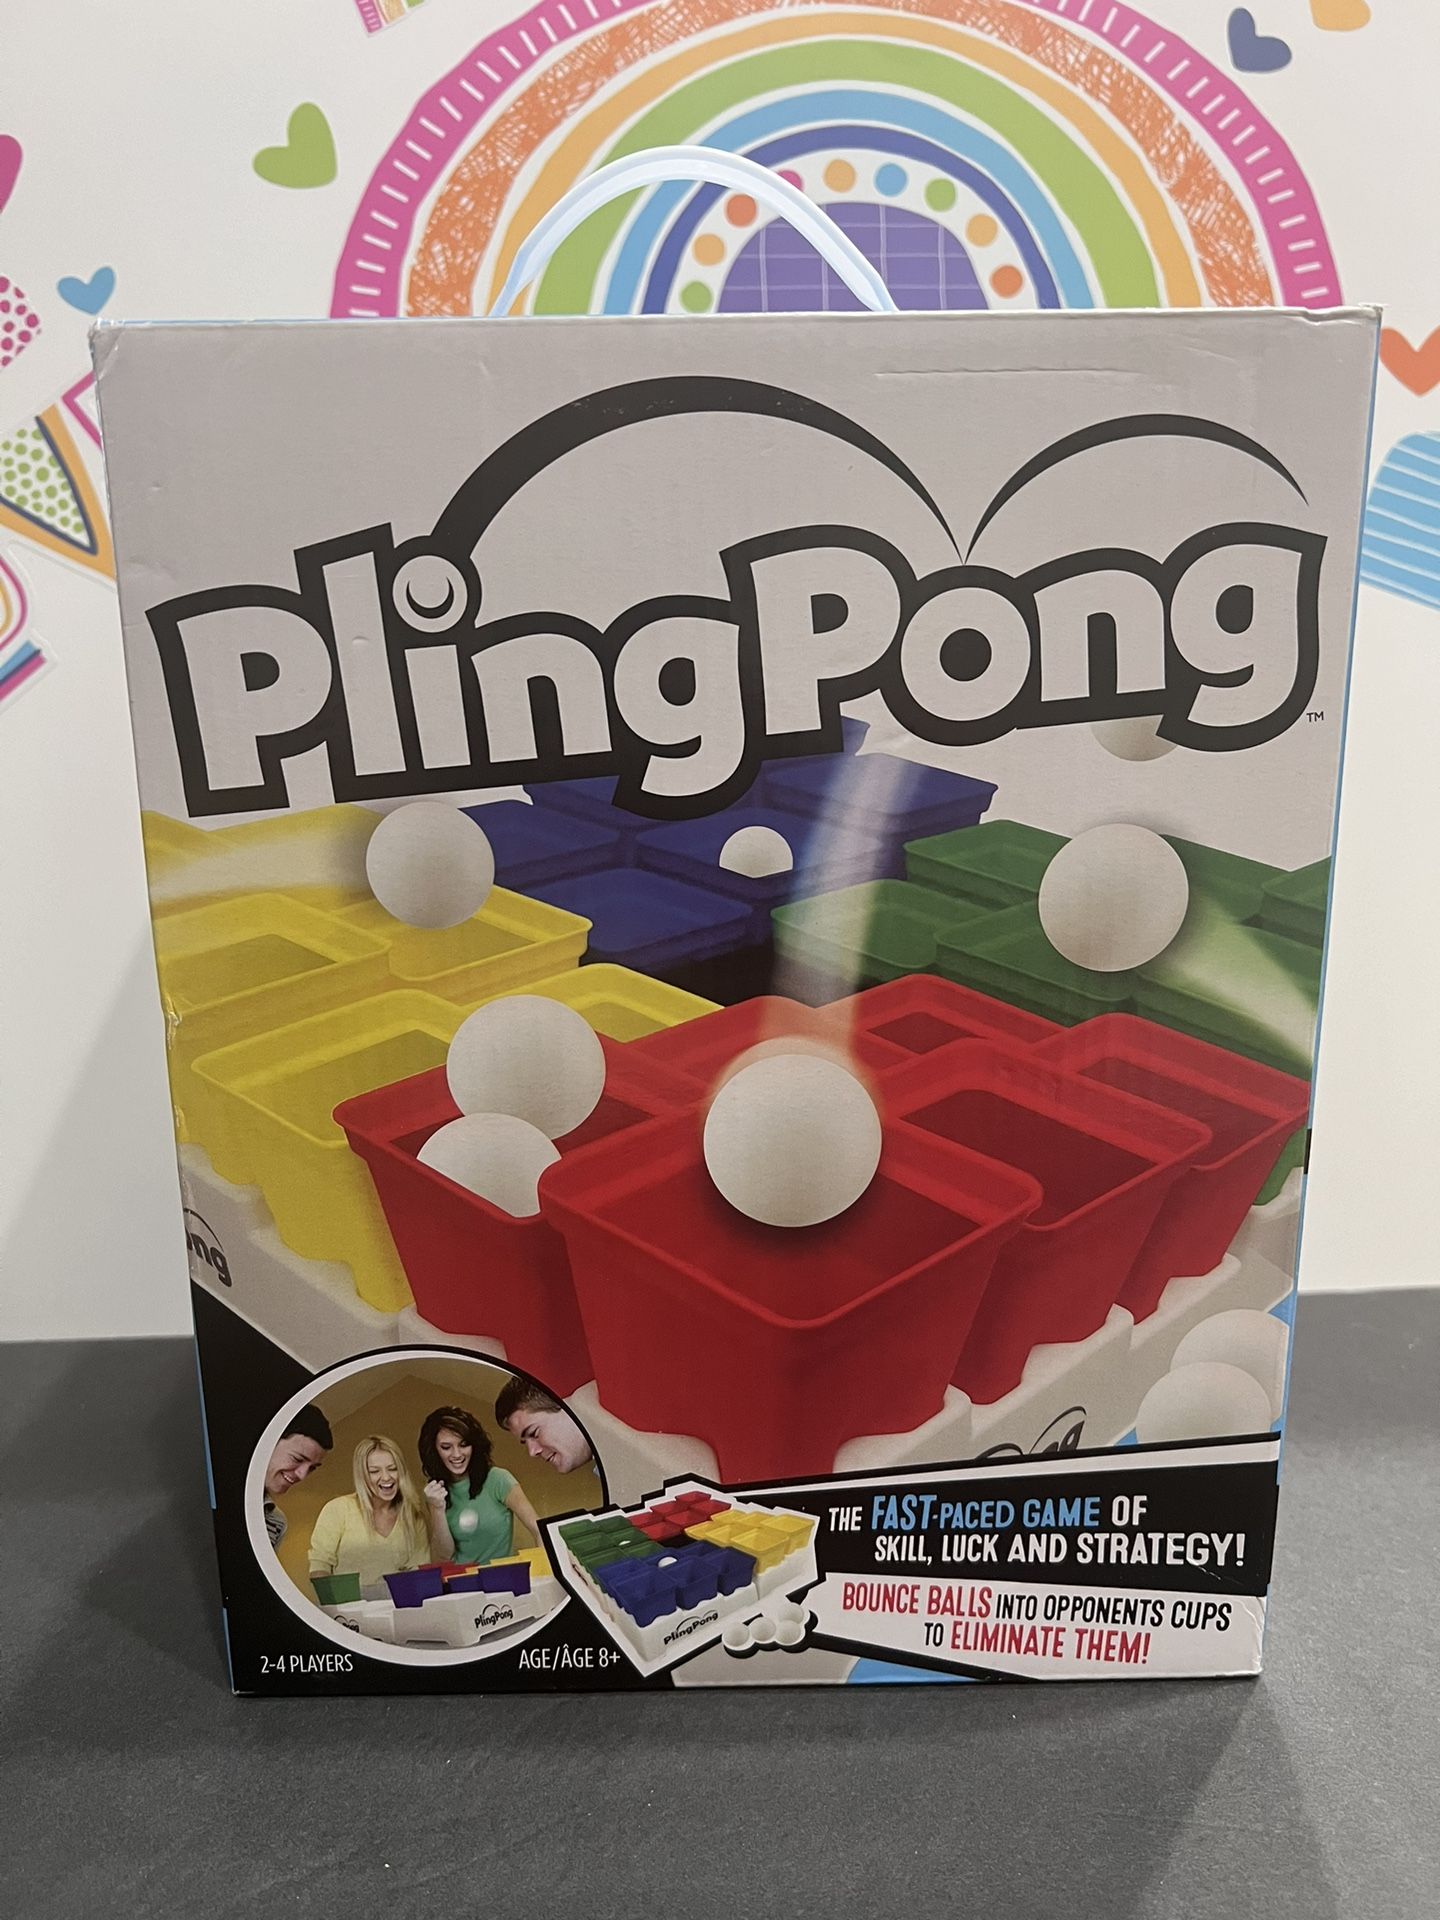 PLING PONG! 2-4 PLAYERS A AGES 8-+ / BRAND NEW